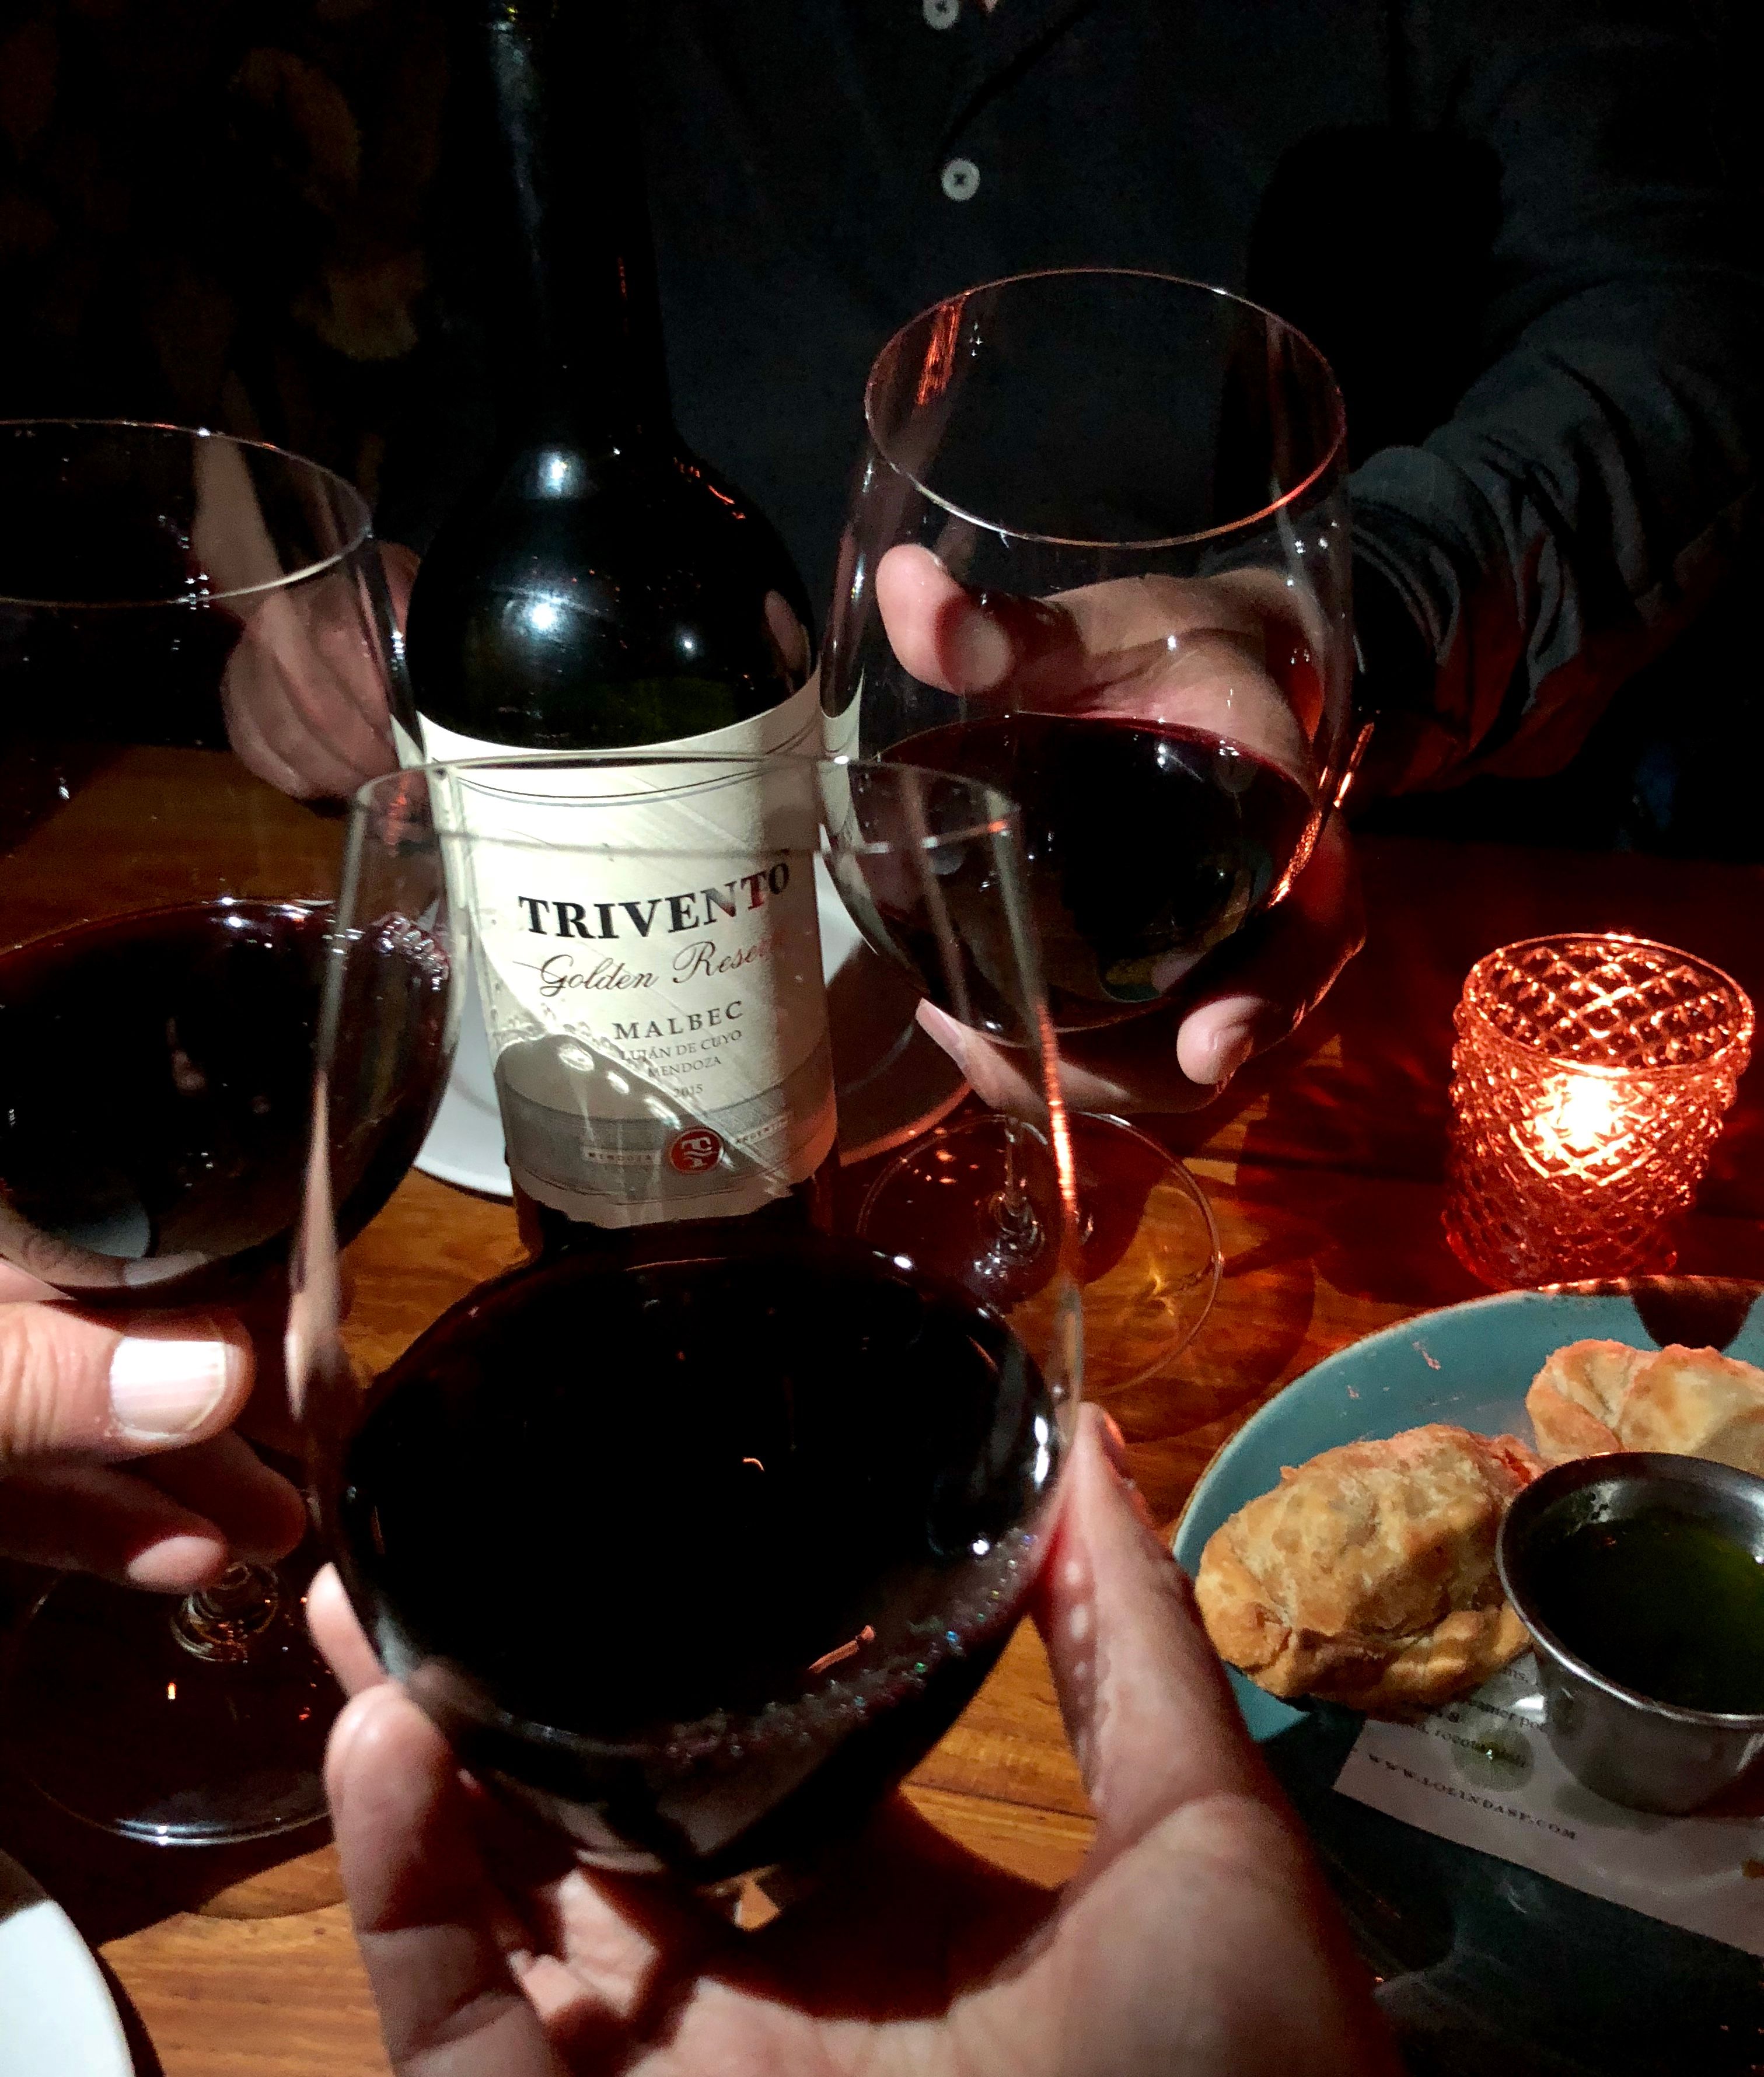 Sharing Argentina wine - Malbec - among friends Local Guides style. Photo credit: @KarenVChin